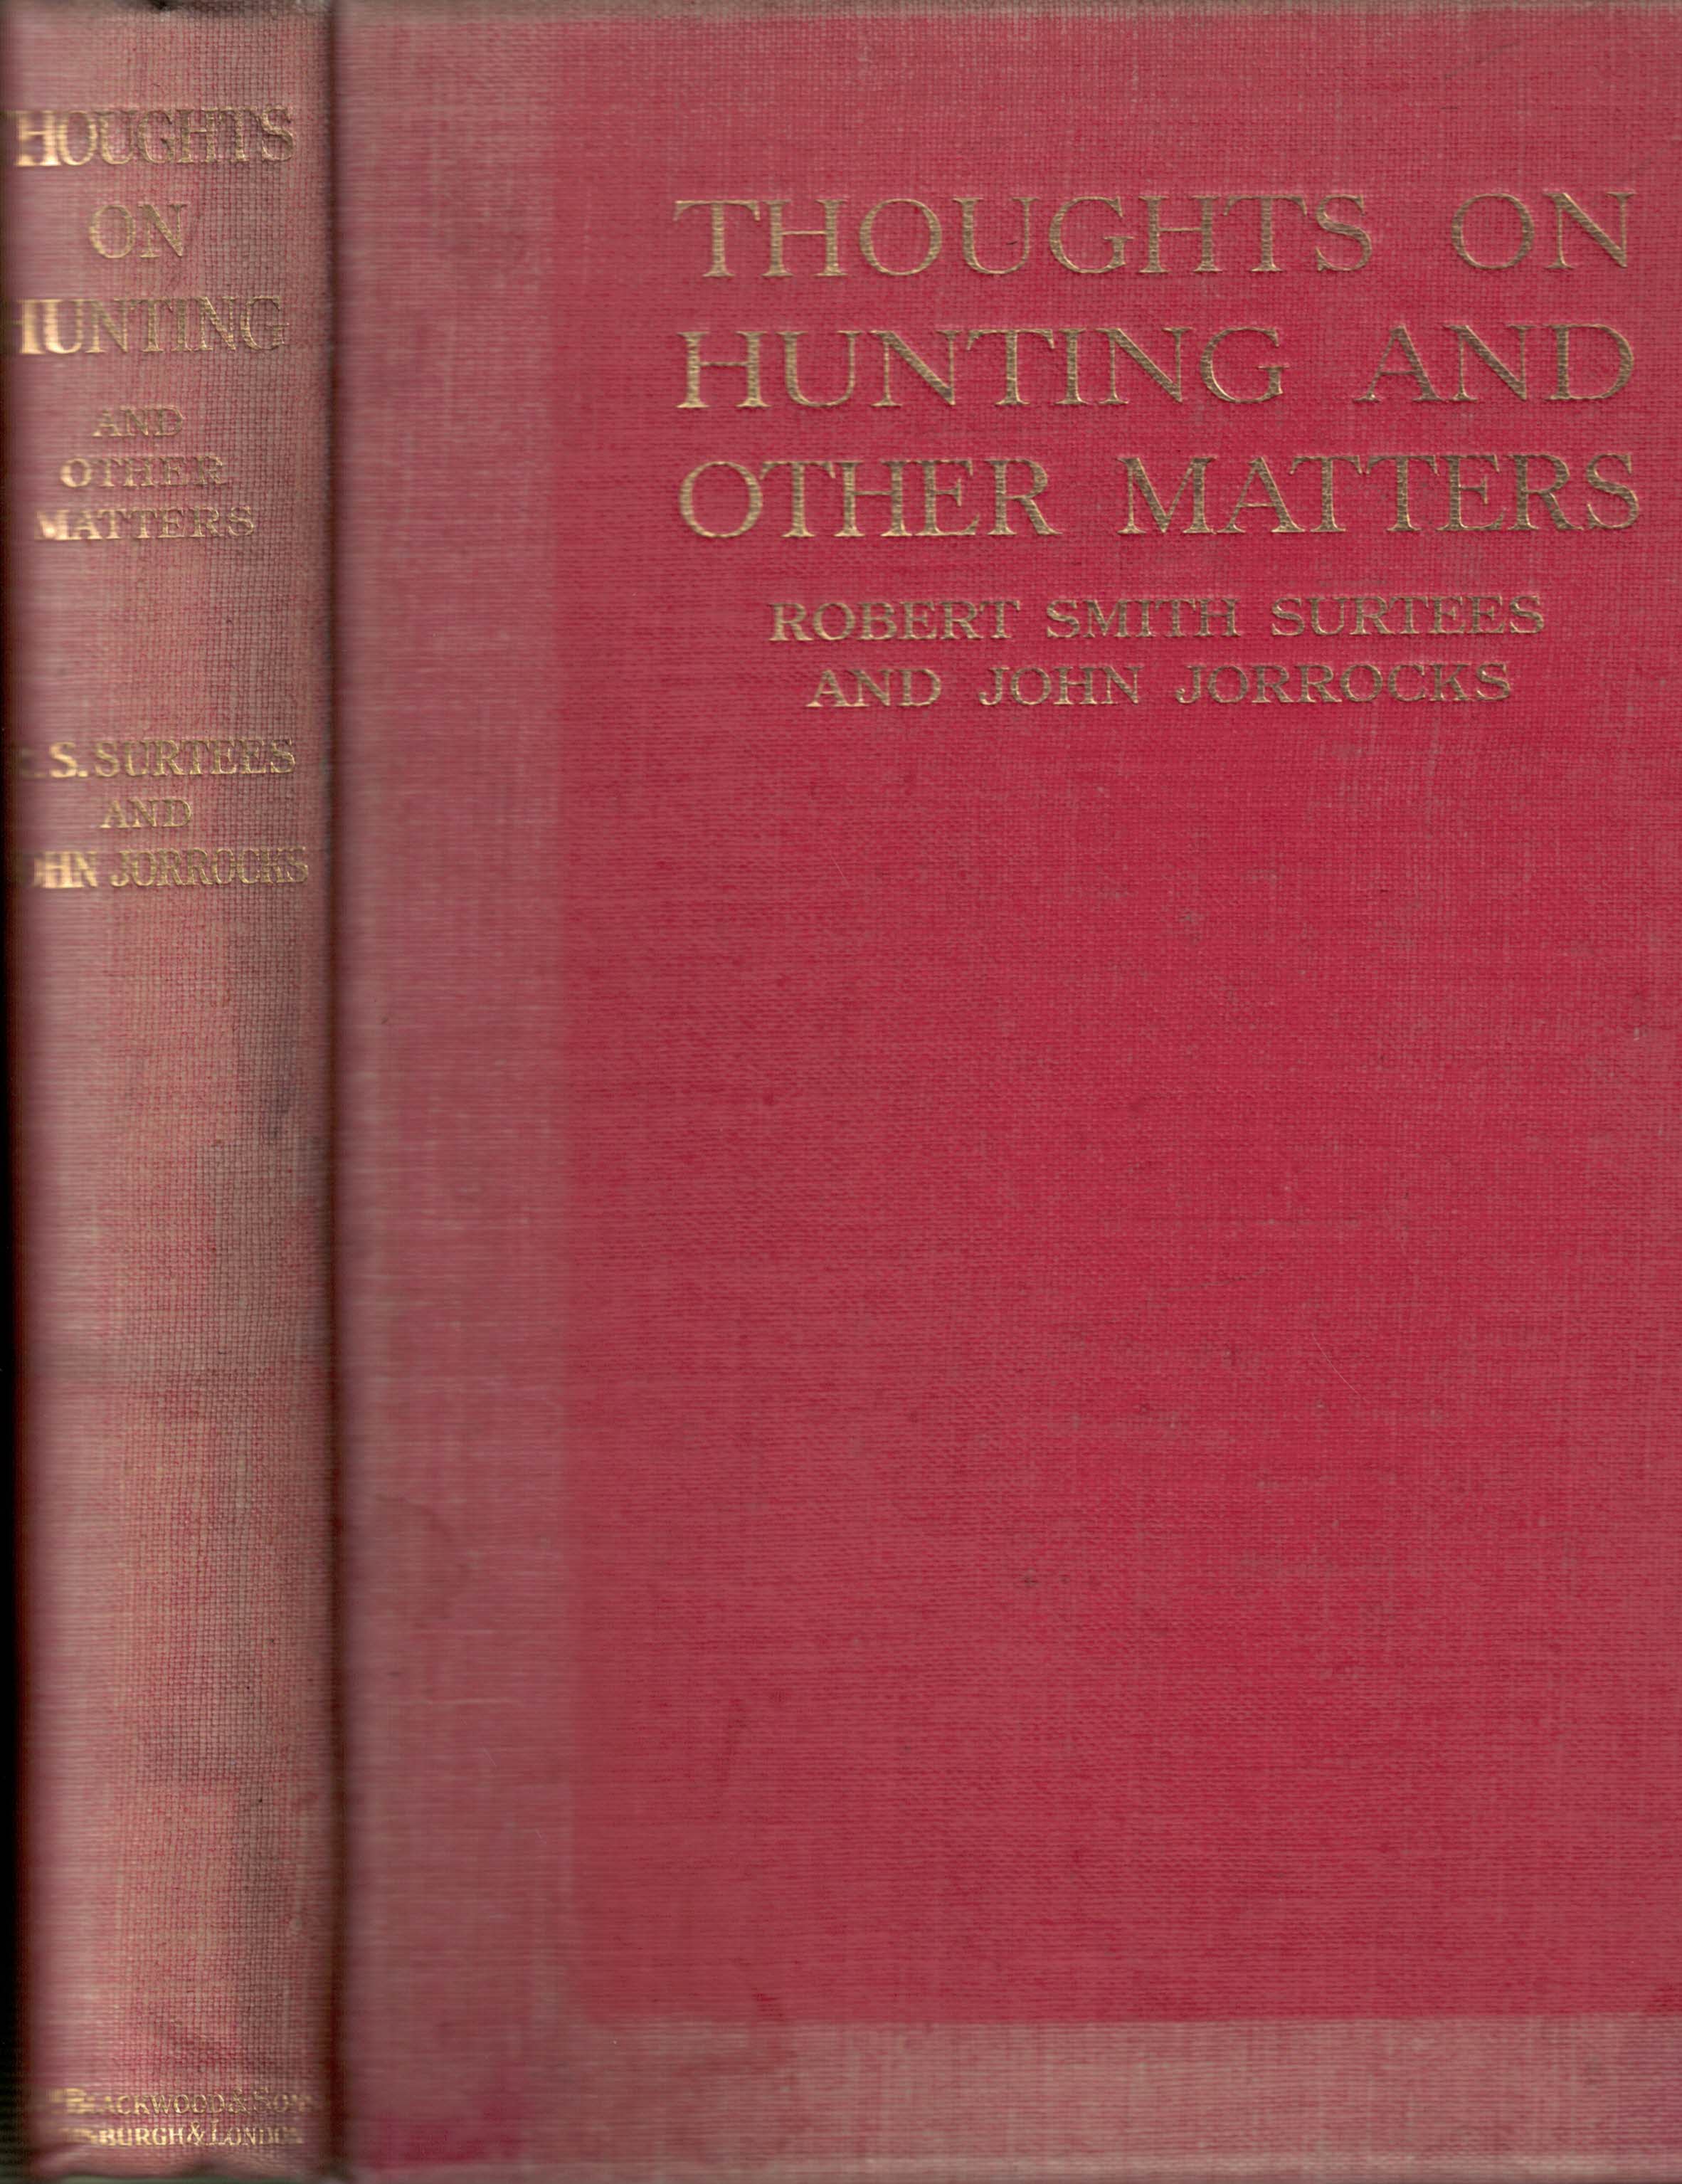 Thoughts on Hunting and Other Matters